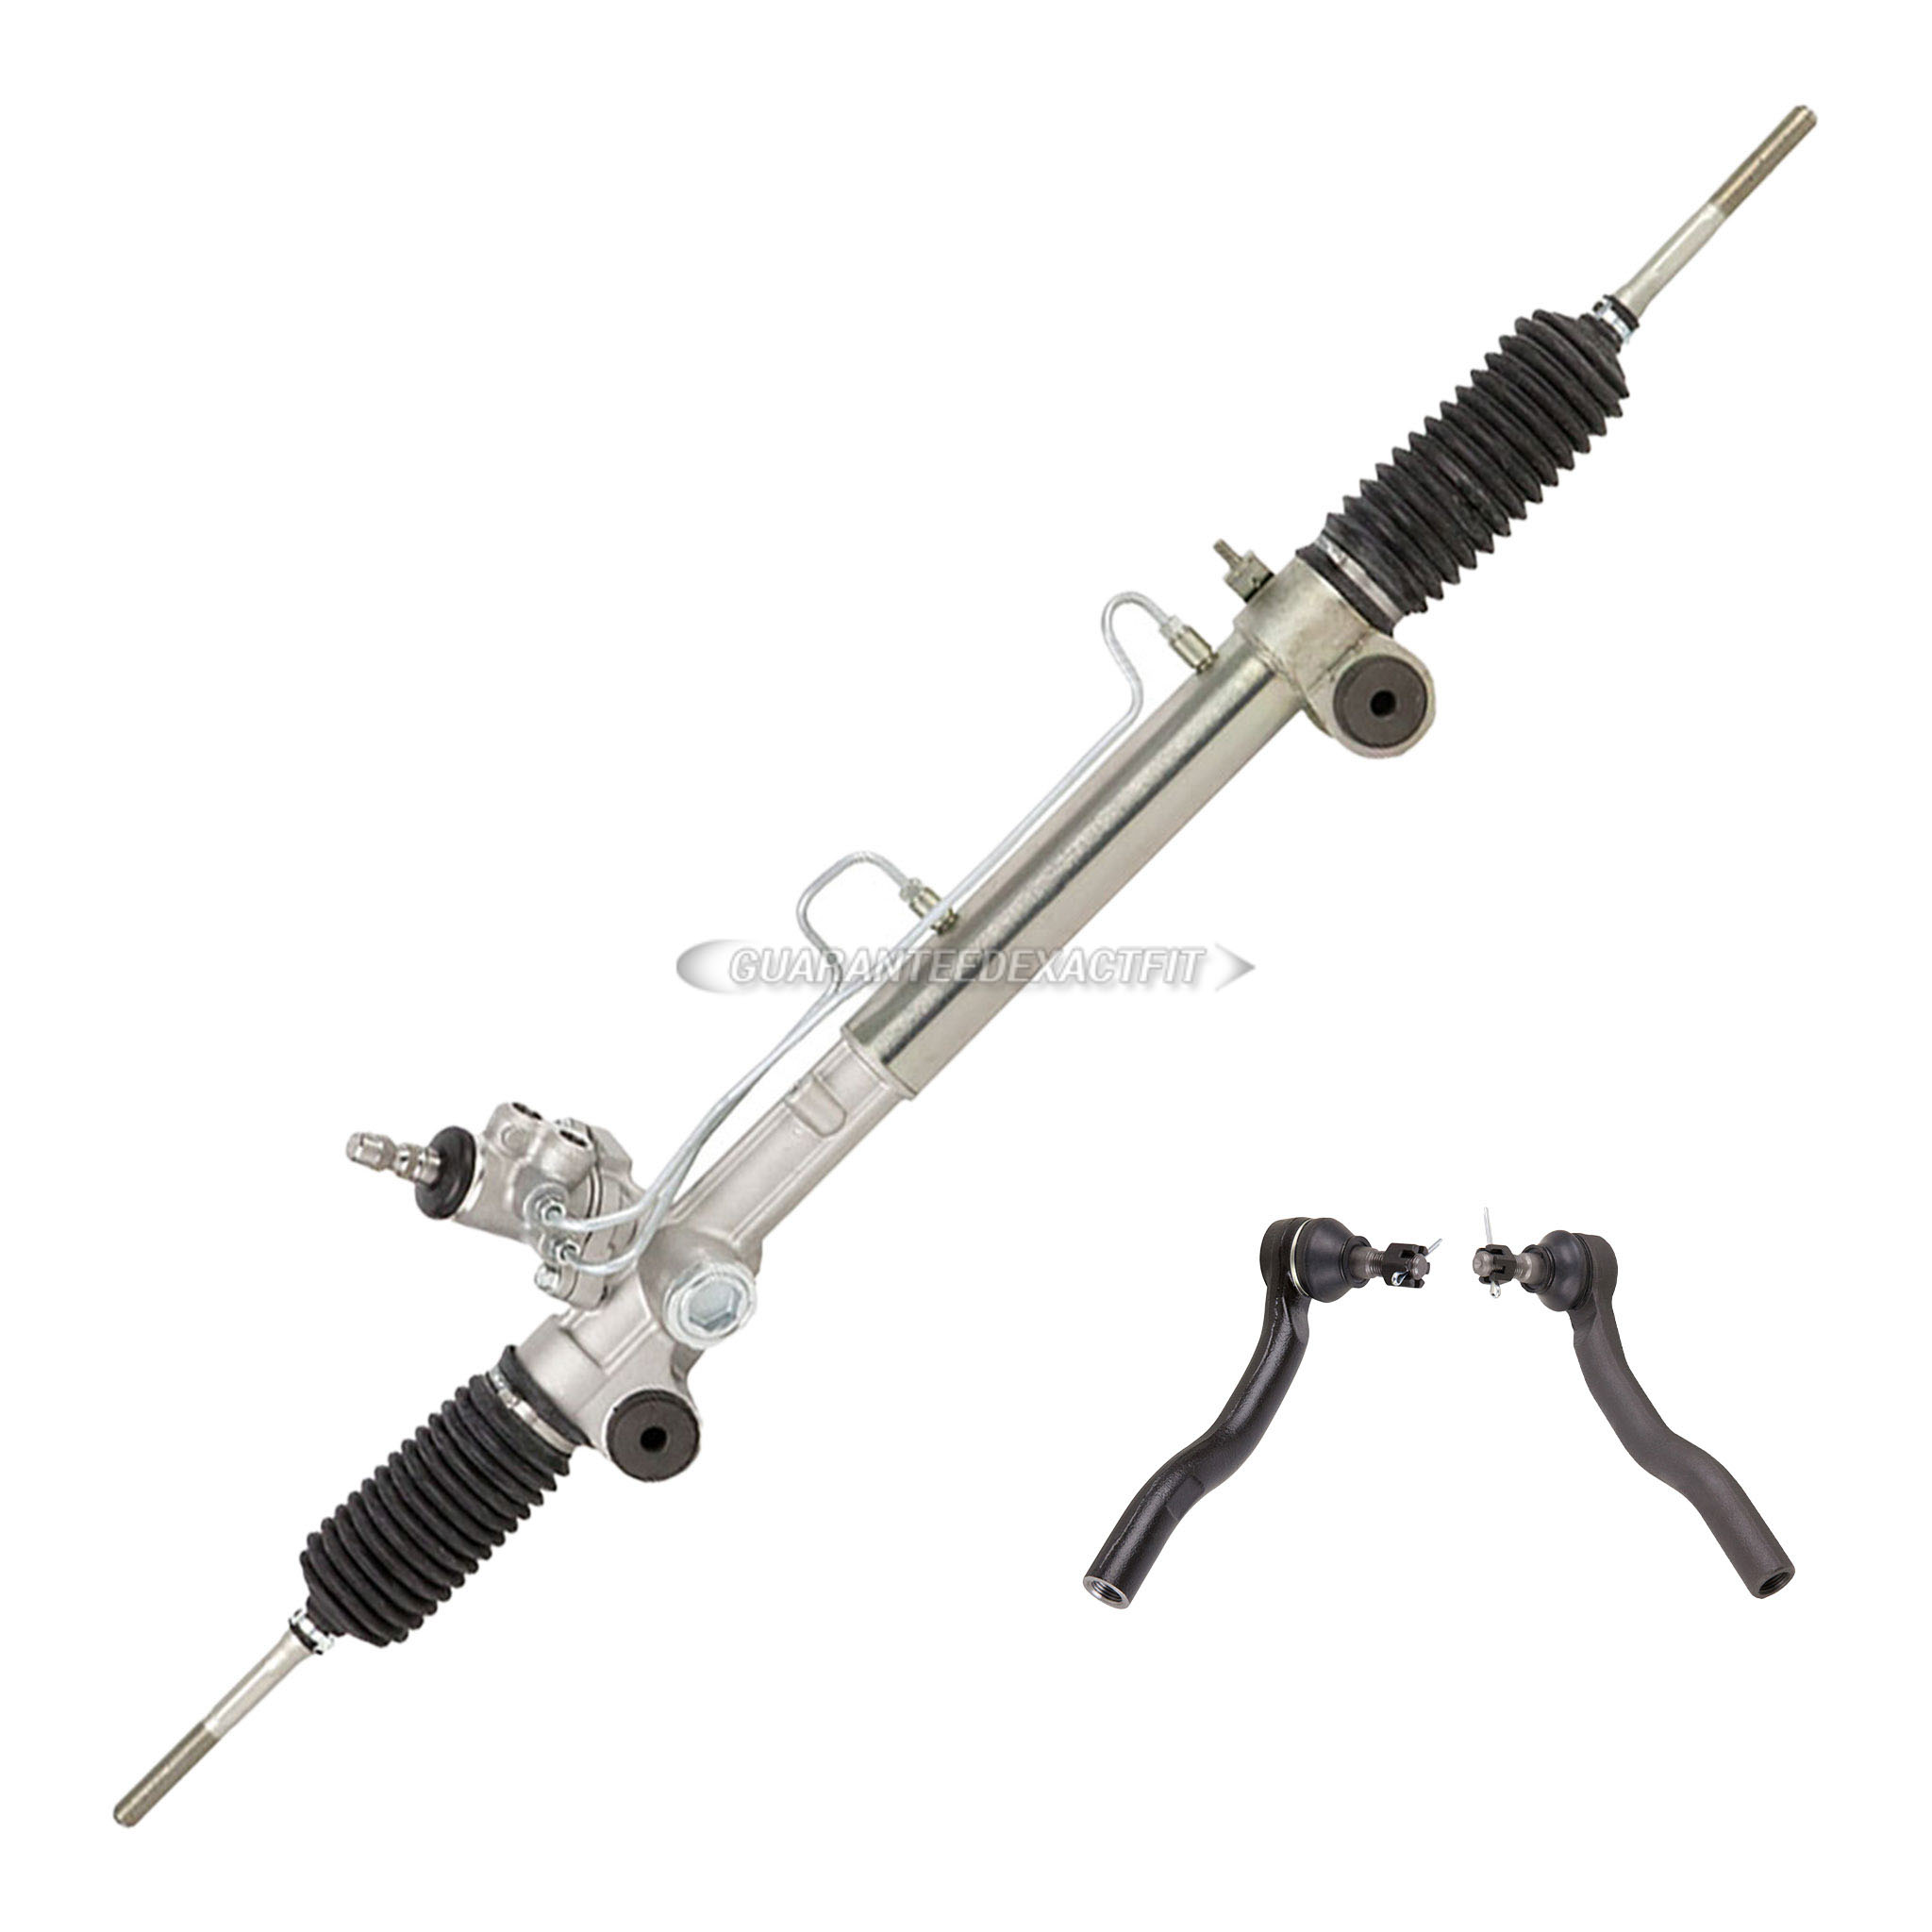  Lexus es350 rack and pinion and outer tie rod kit 